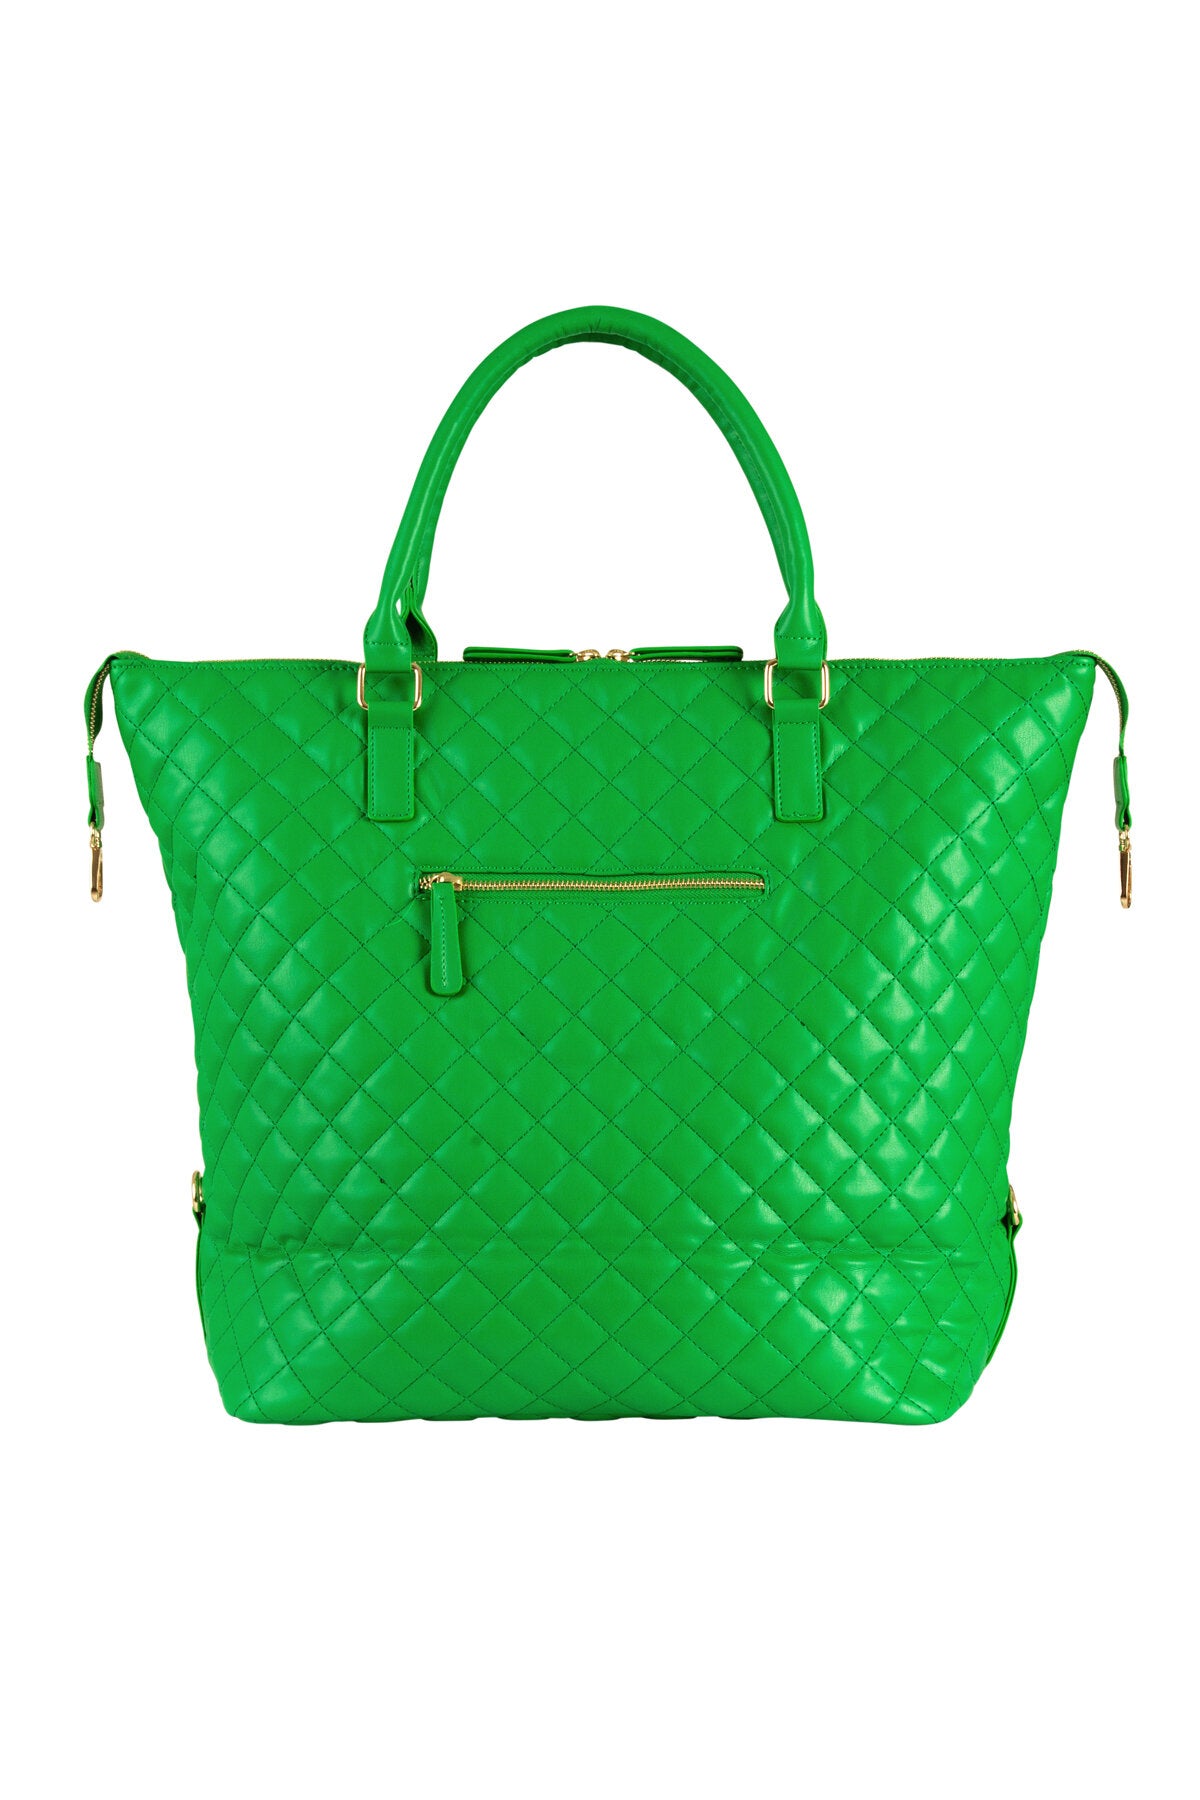 Trelise Cooper - Not Quilty Tote Green